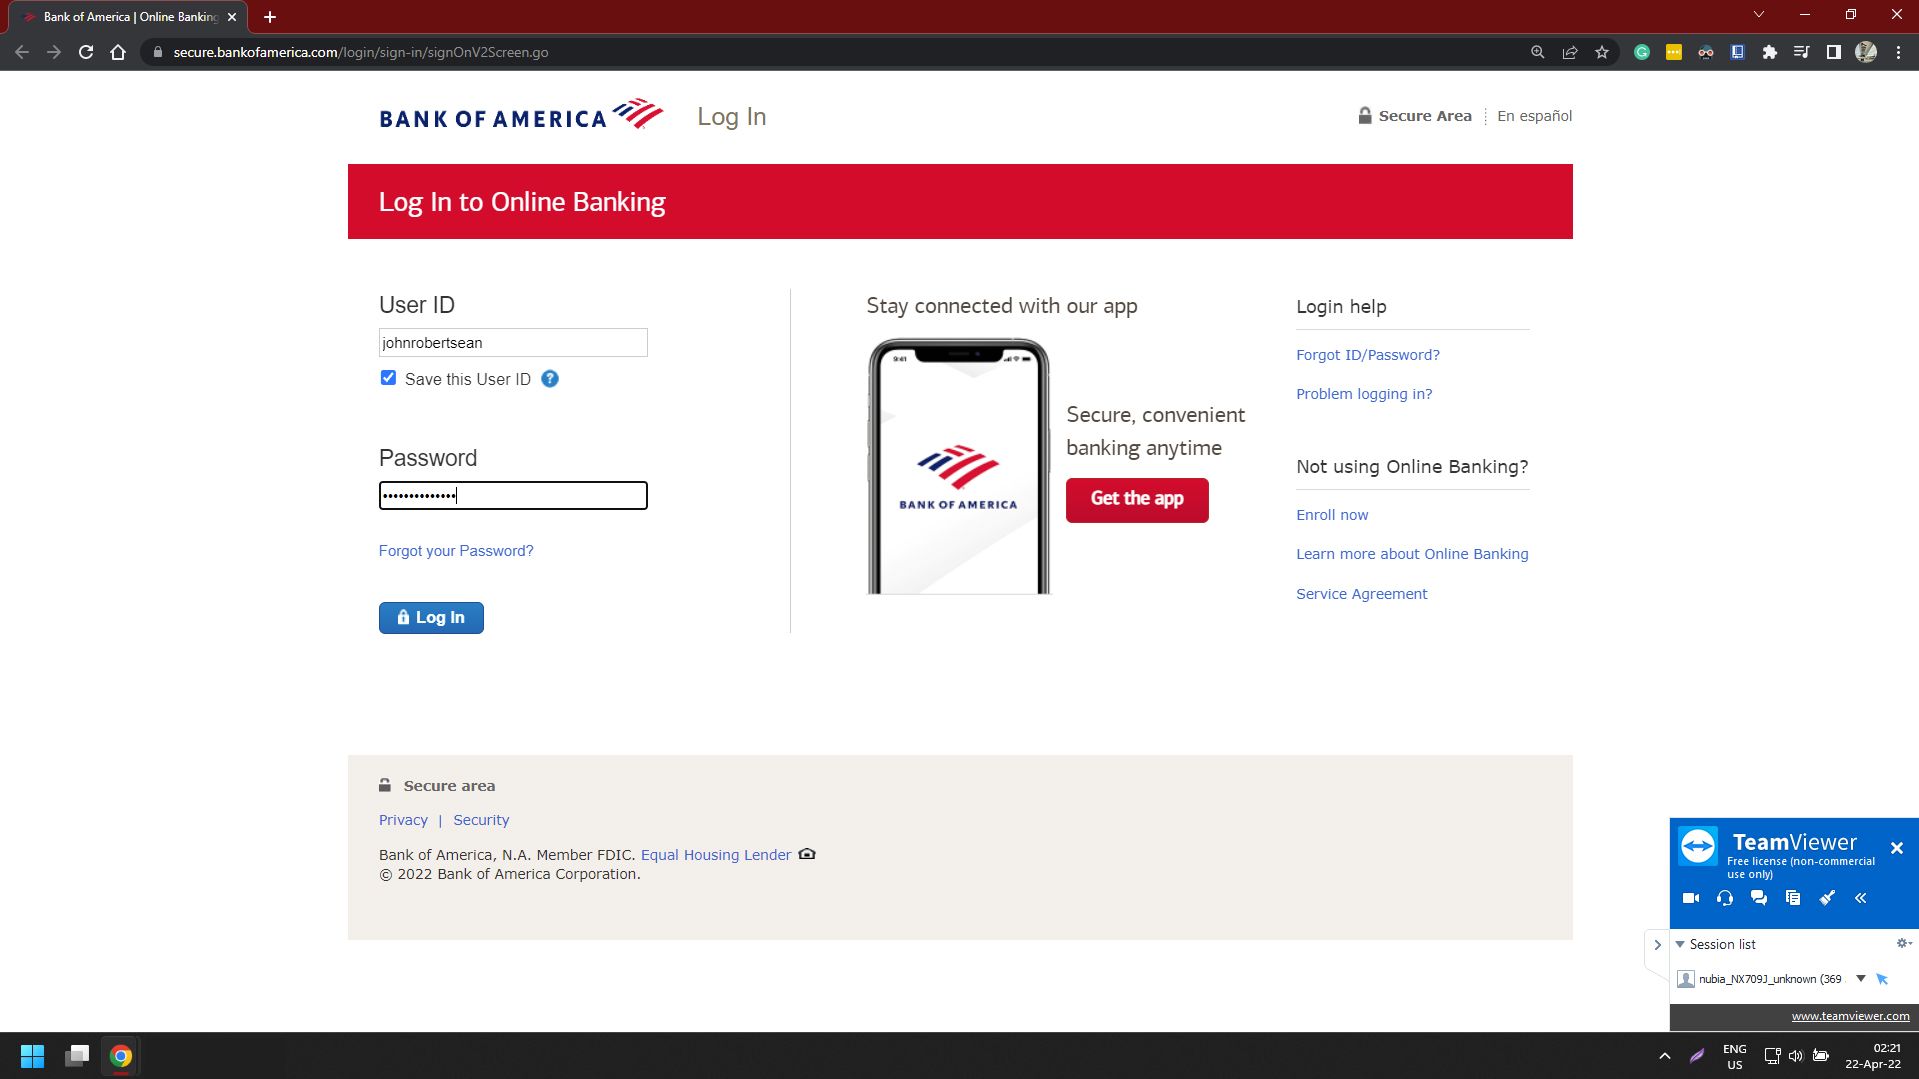 teamviewer remote control accessing the bank of america page